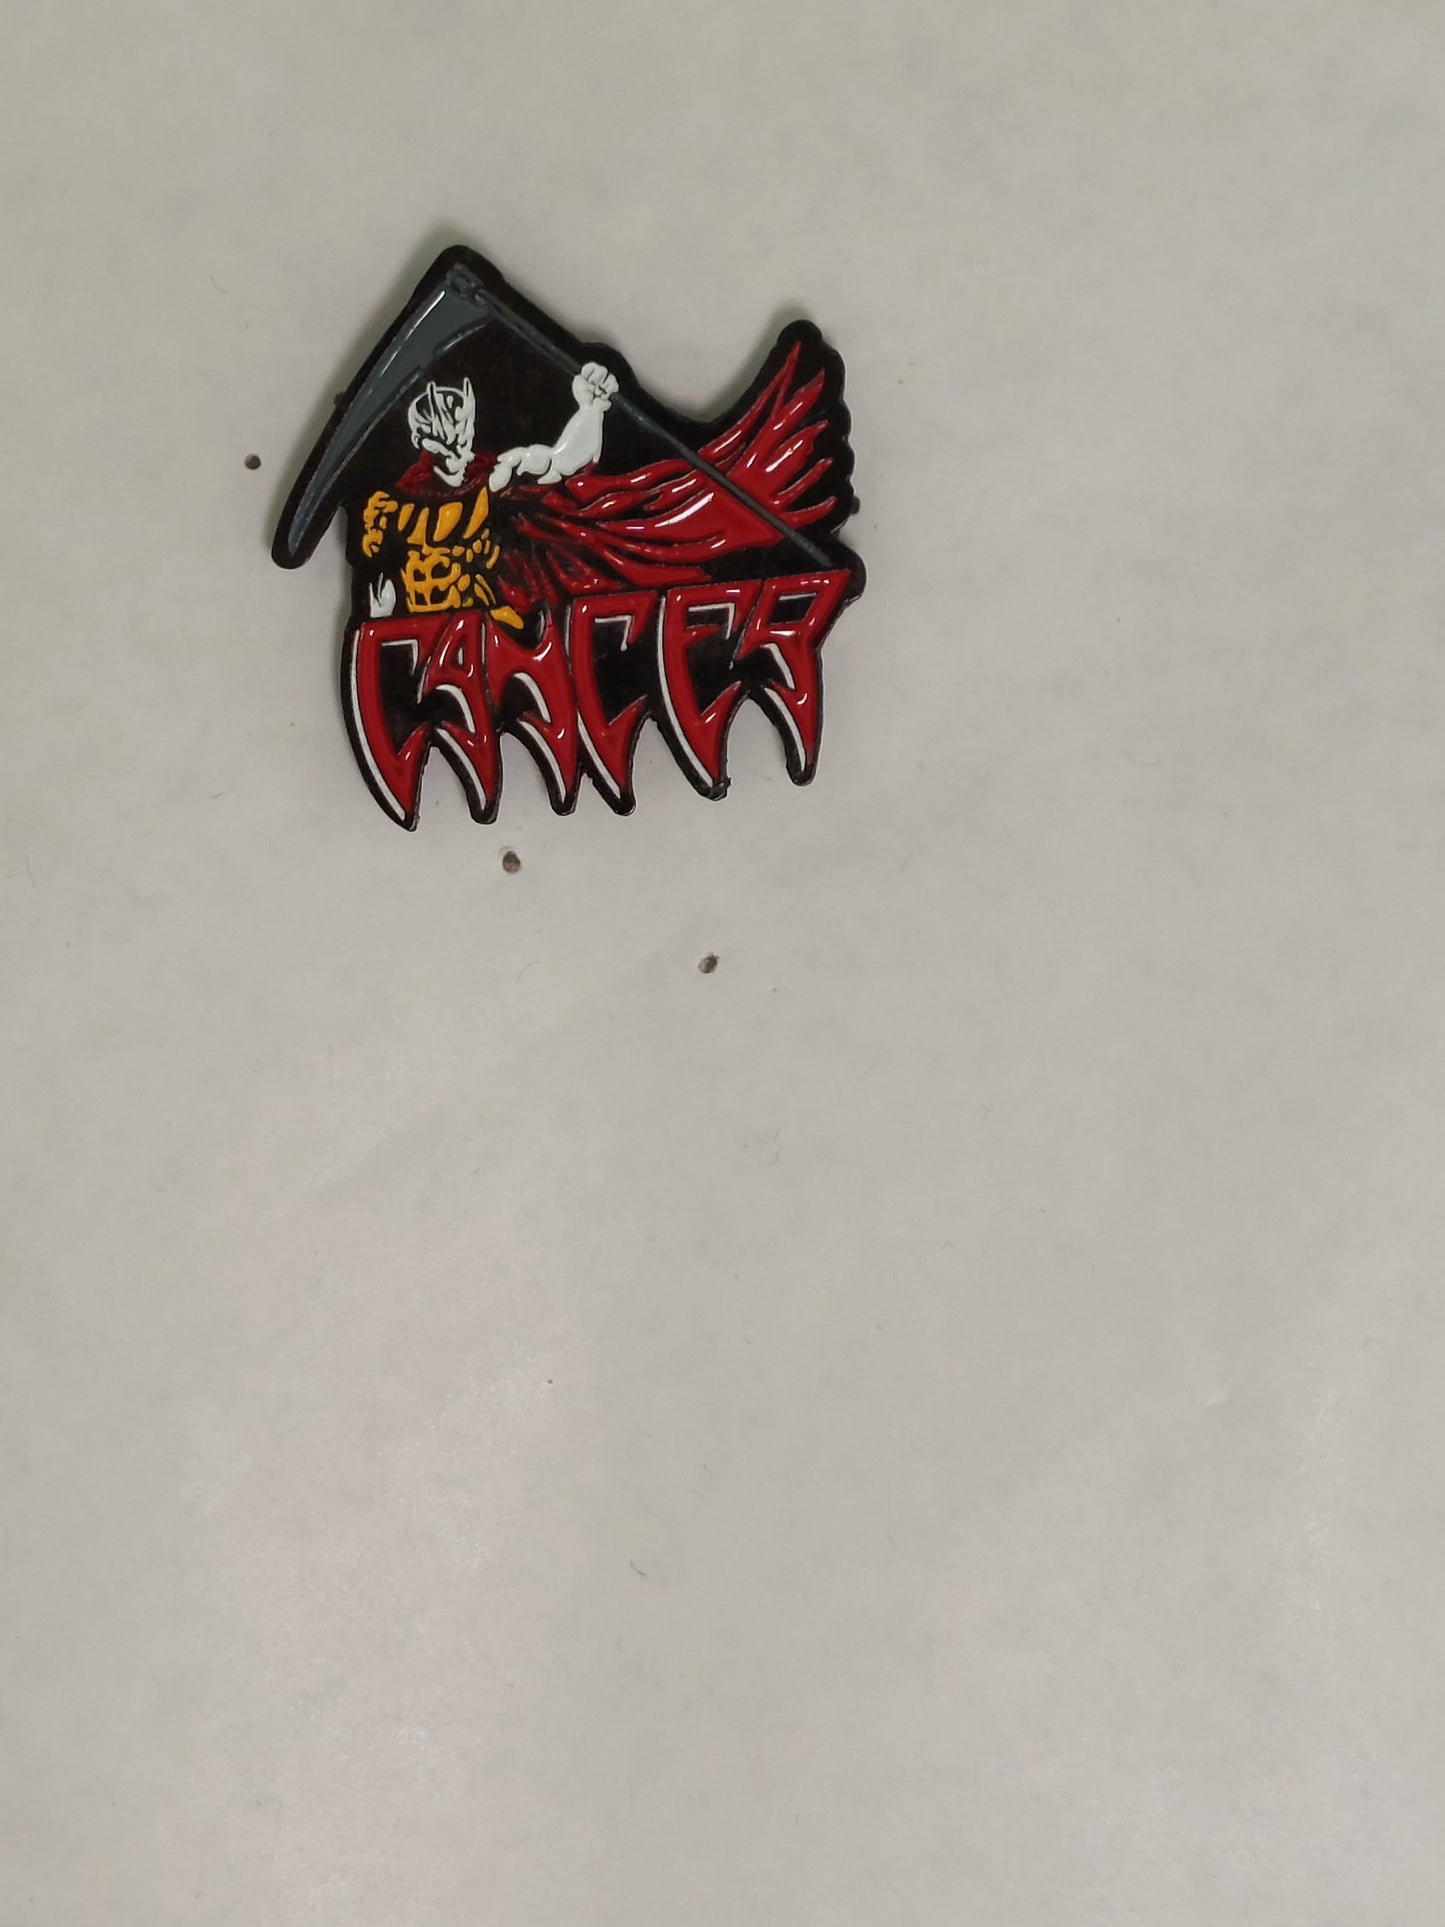 Cancer death shall rise pin